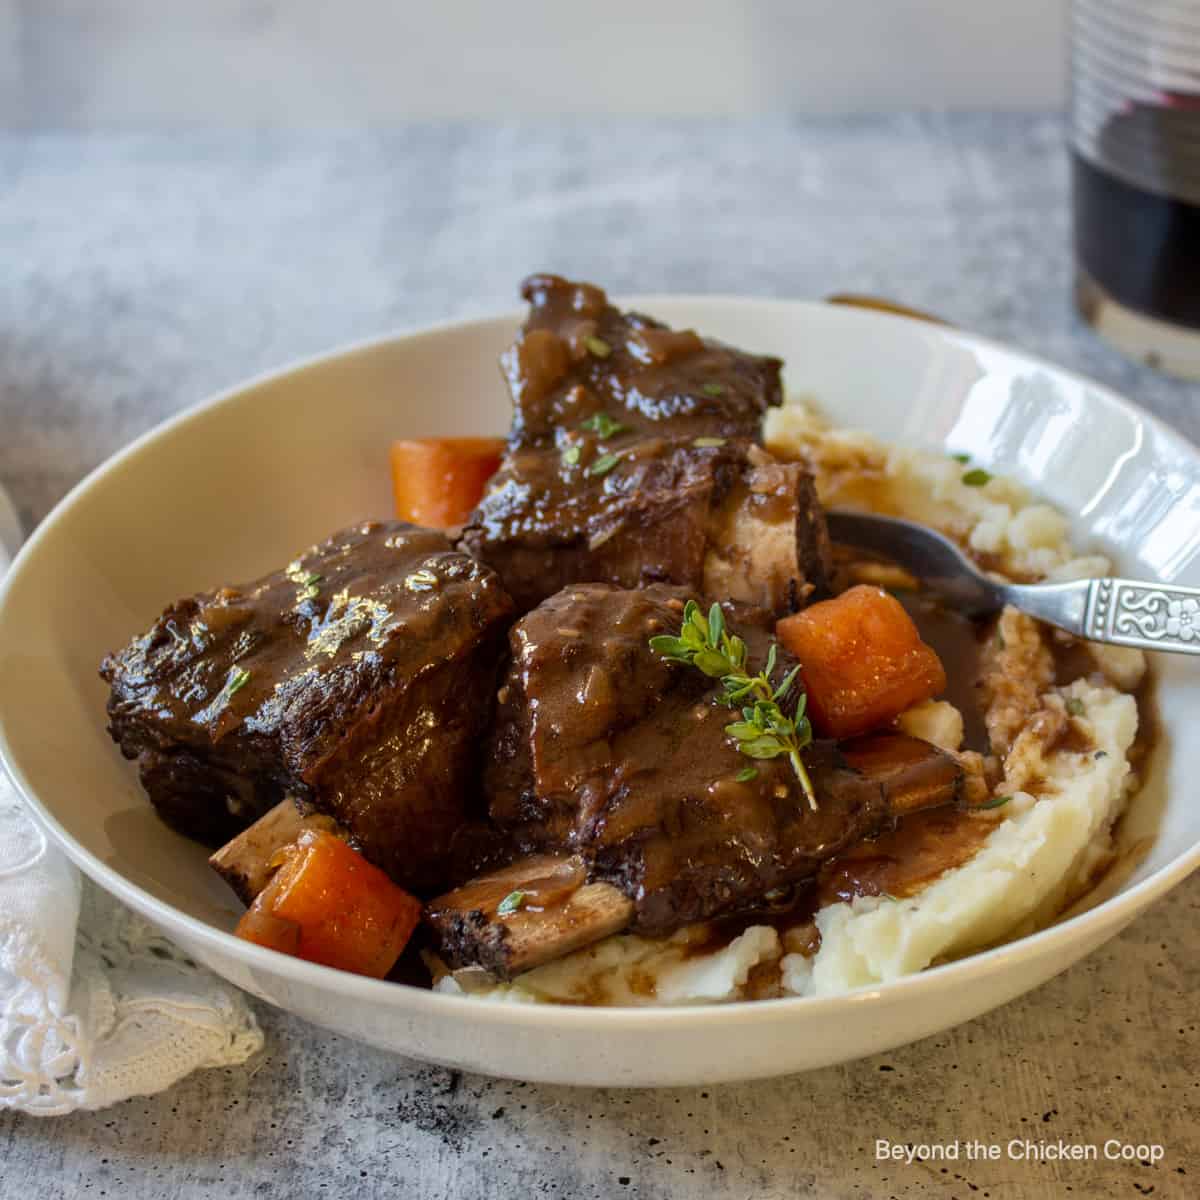 Short ribs on mashed potatoes topped with a brown sauce.